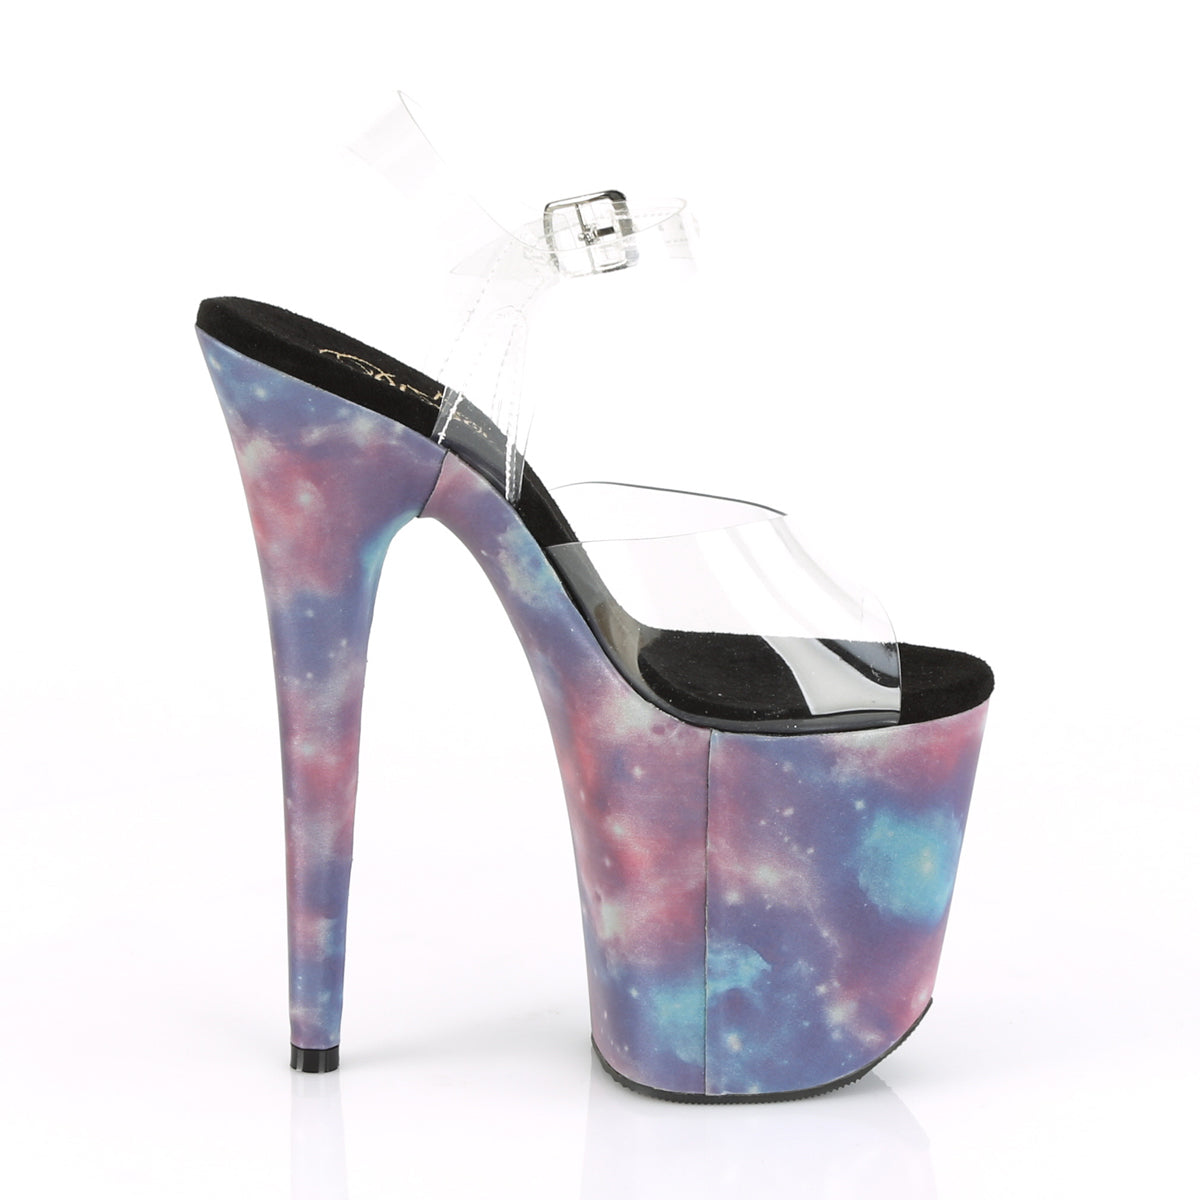 FLAMINGO-808REFL 8" Heel Clear Purple-Blue Strippers Shoes-Pleaser- Sexy Shoes Fetish Heels